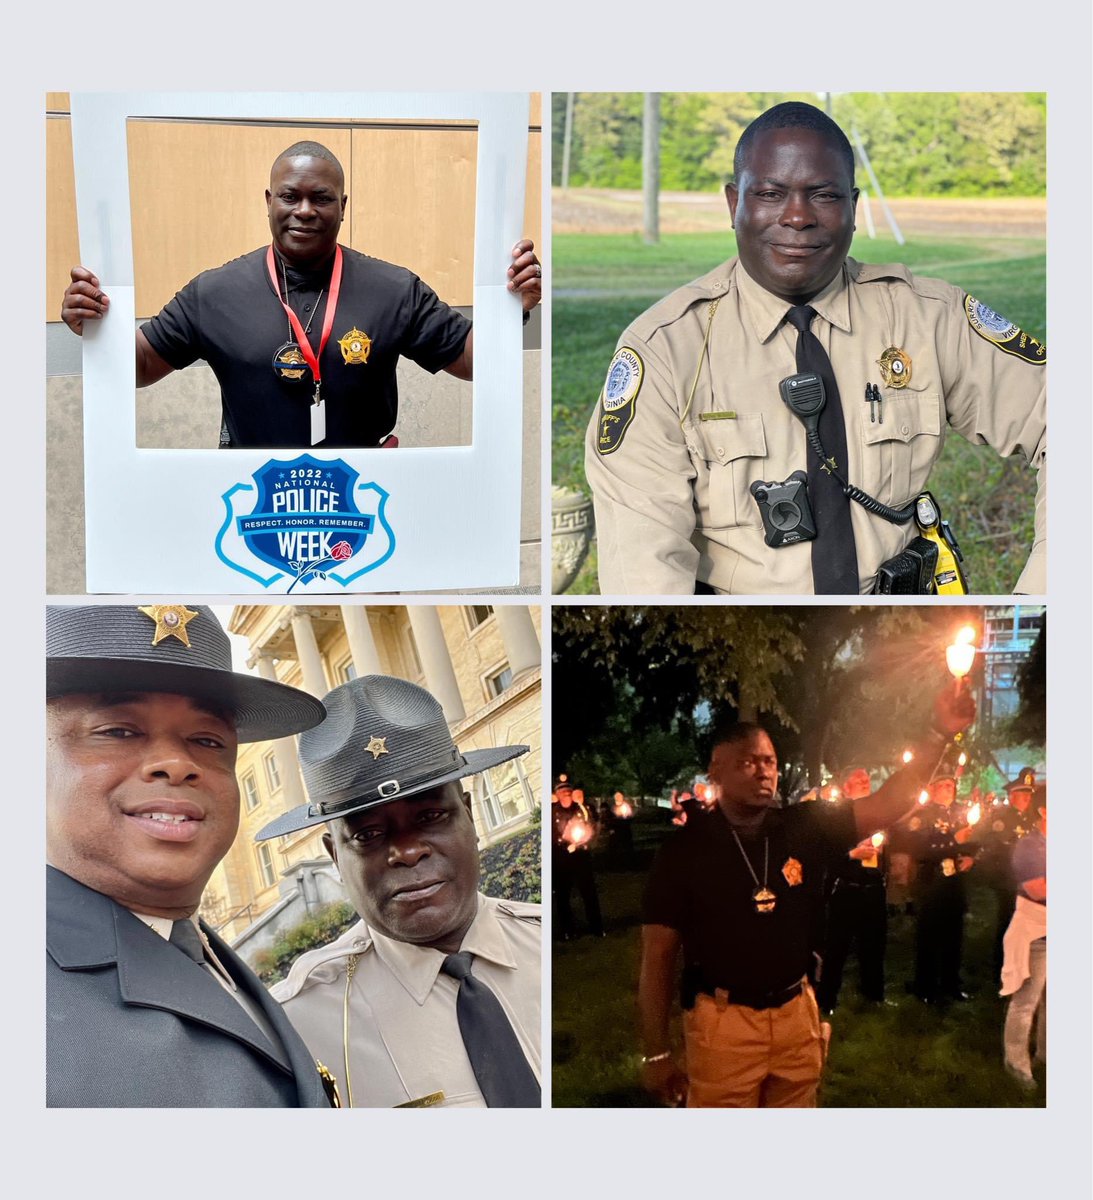 Today is School Resource Officer Appreciation day! So we recognize Deputy R. Scott, for the hard work and dedication he shows to keeping ￼Surry County Public Schools safe each day. We say, thank you, thank you for keeping the students, teachers and staff safe in our schools.